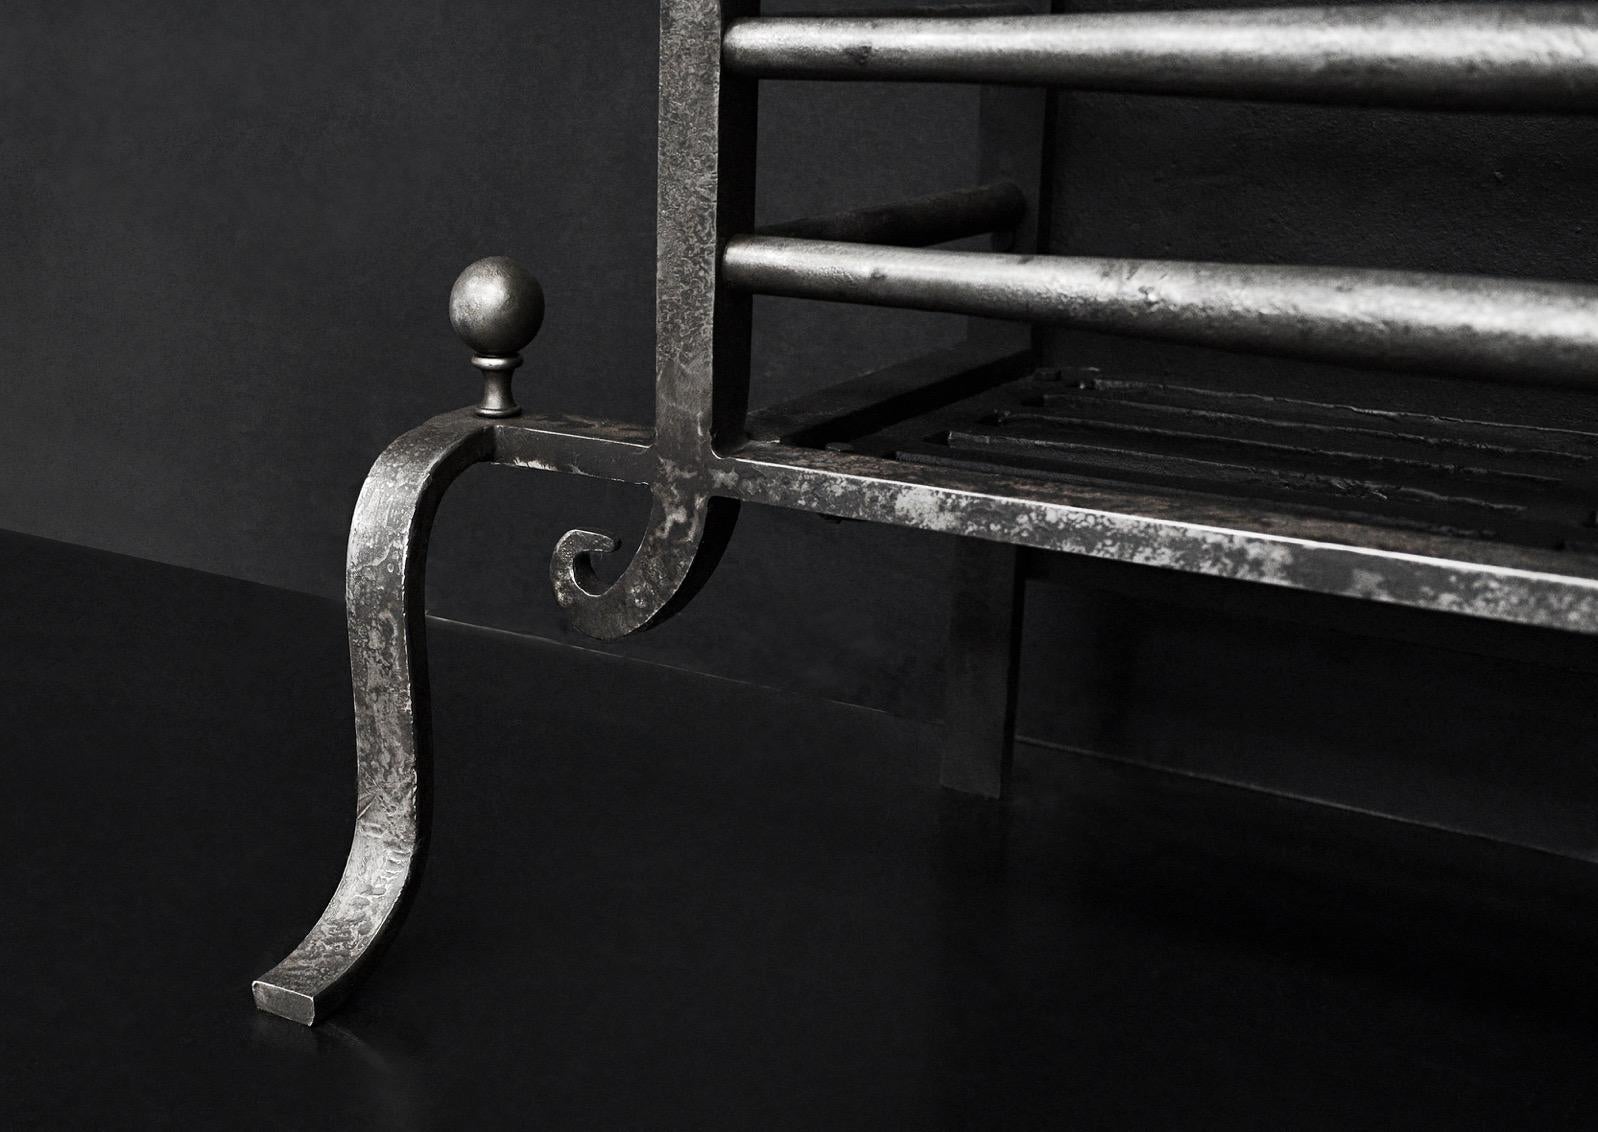 An English antique steel firegrate. The shaped feet surmounted by ball finial, the burning area with elegant front bars and shepherd's crook finials on each side. Square cast iron fireback. A copy of an original piece. N.B. May be subject to an